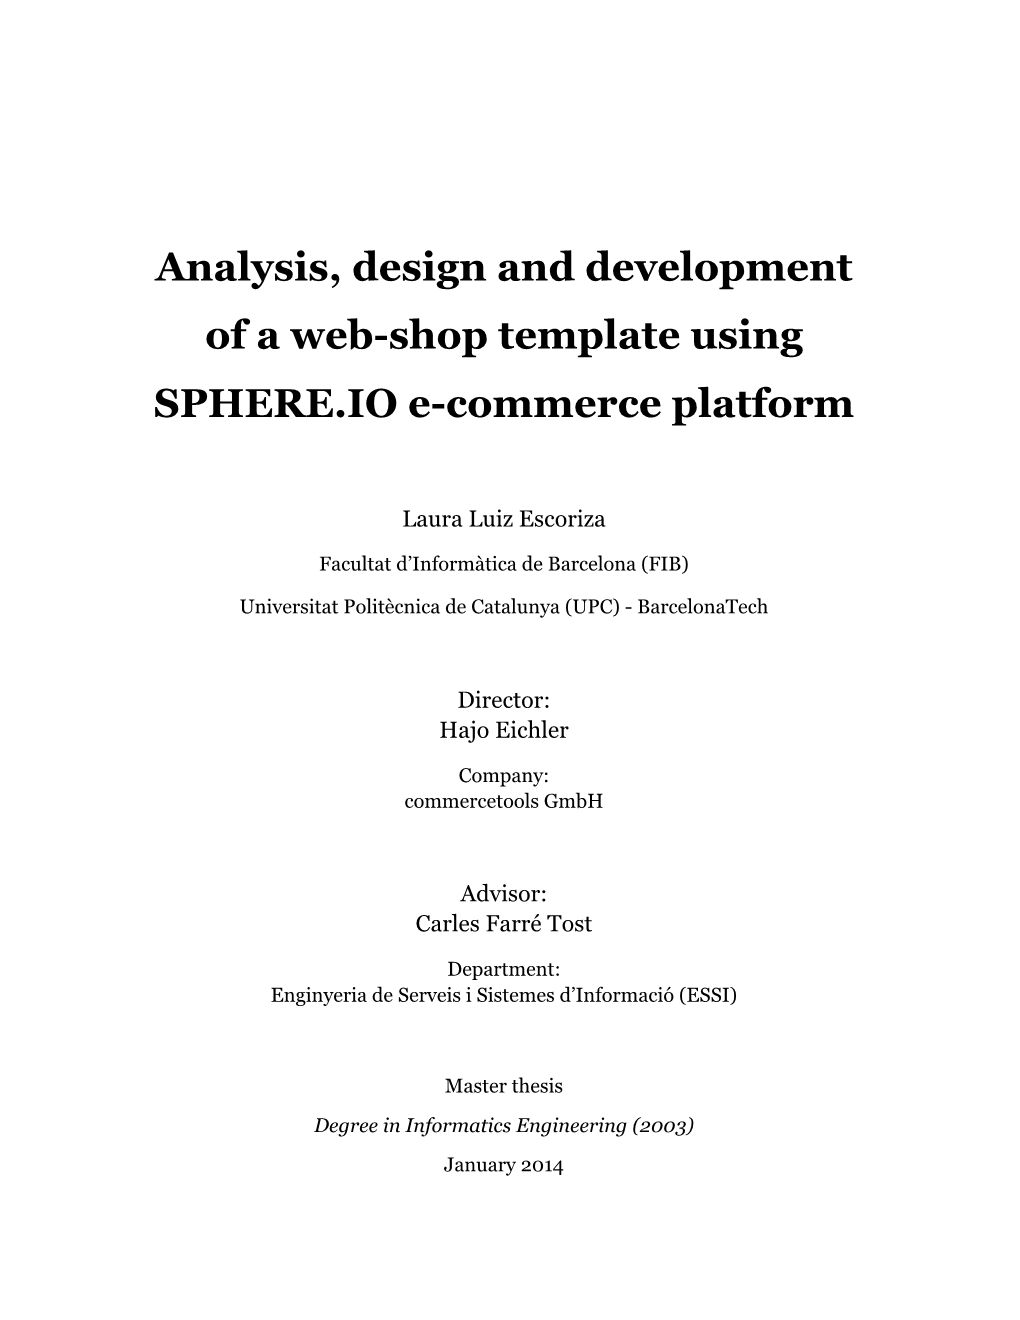 Analysis, Design and Development of a Web-Shop Template Using